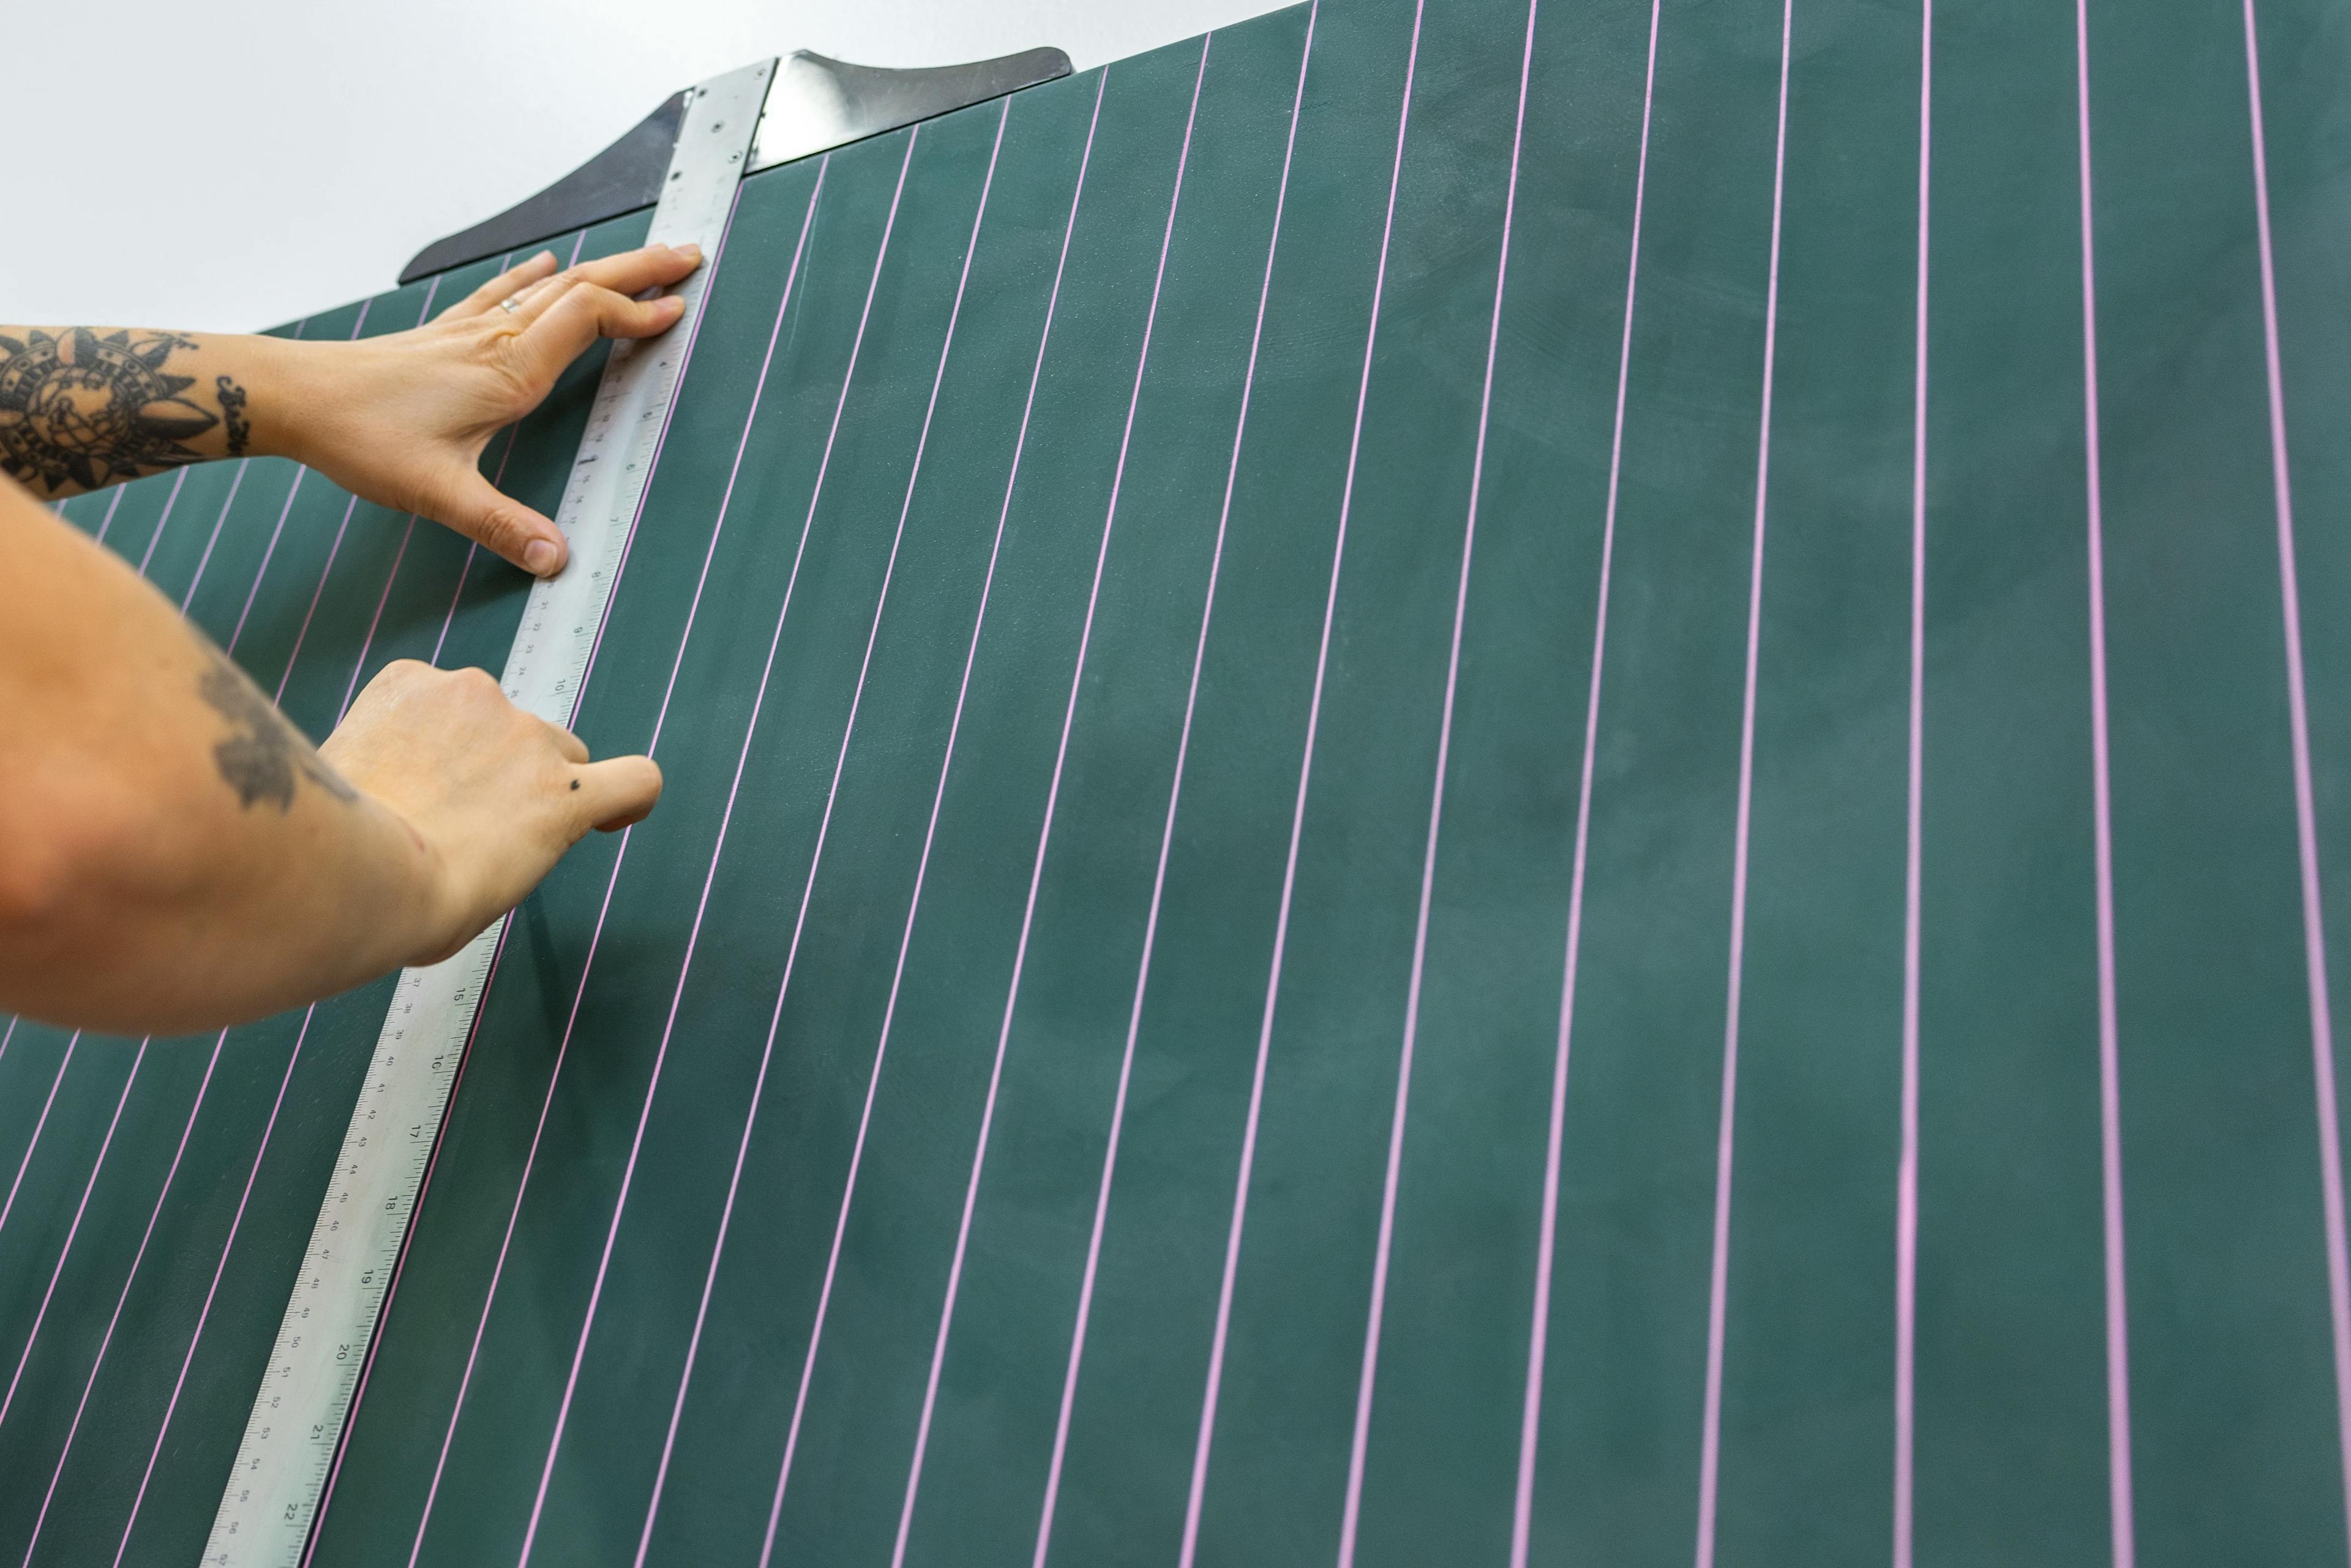 Artist Arielle Zamora using a ruler to create vertical purple lines on a green panel.